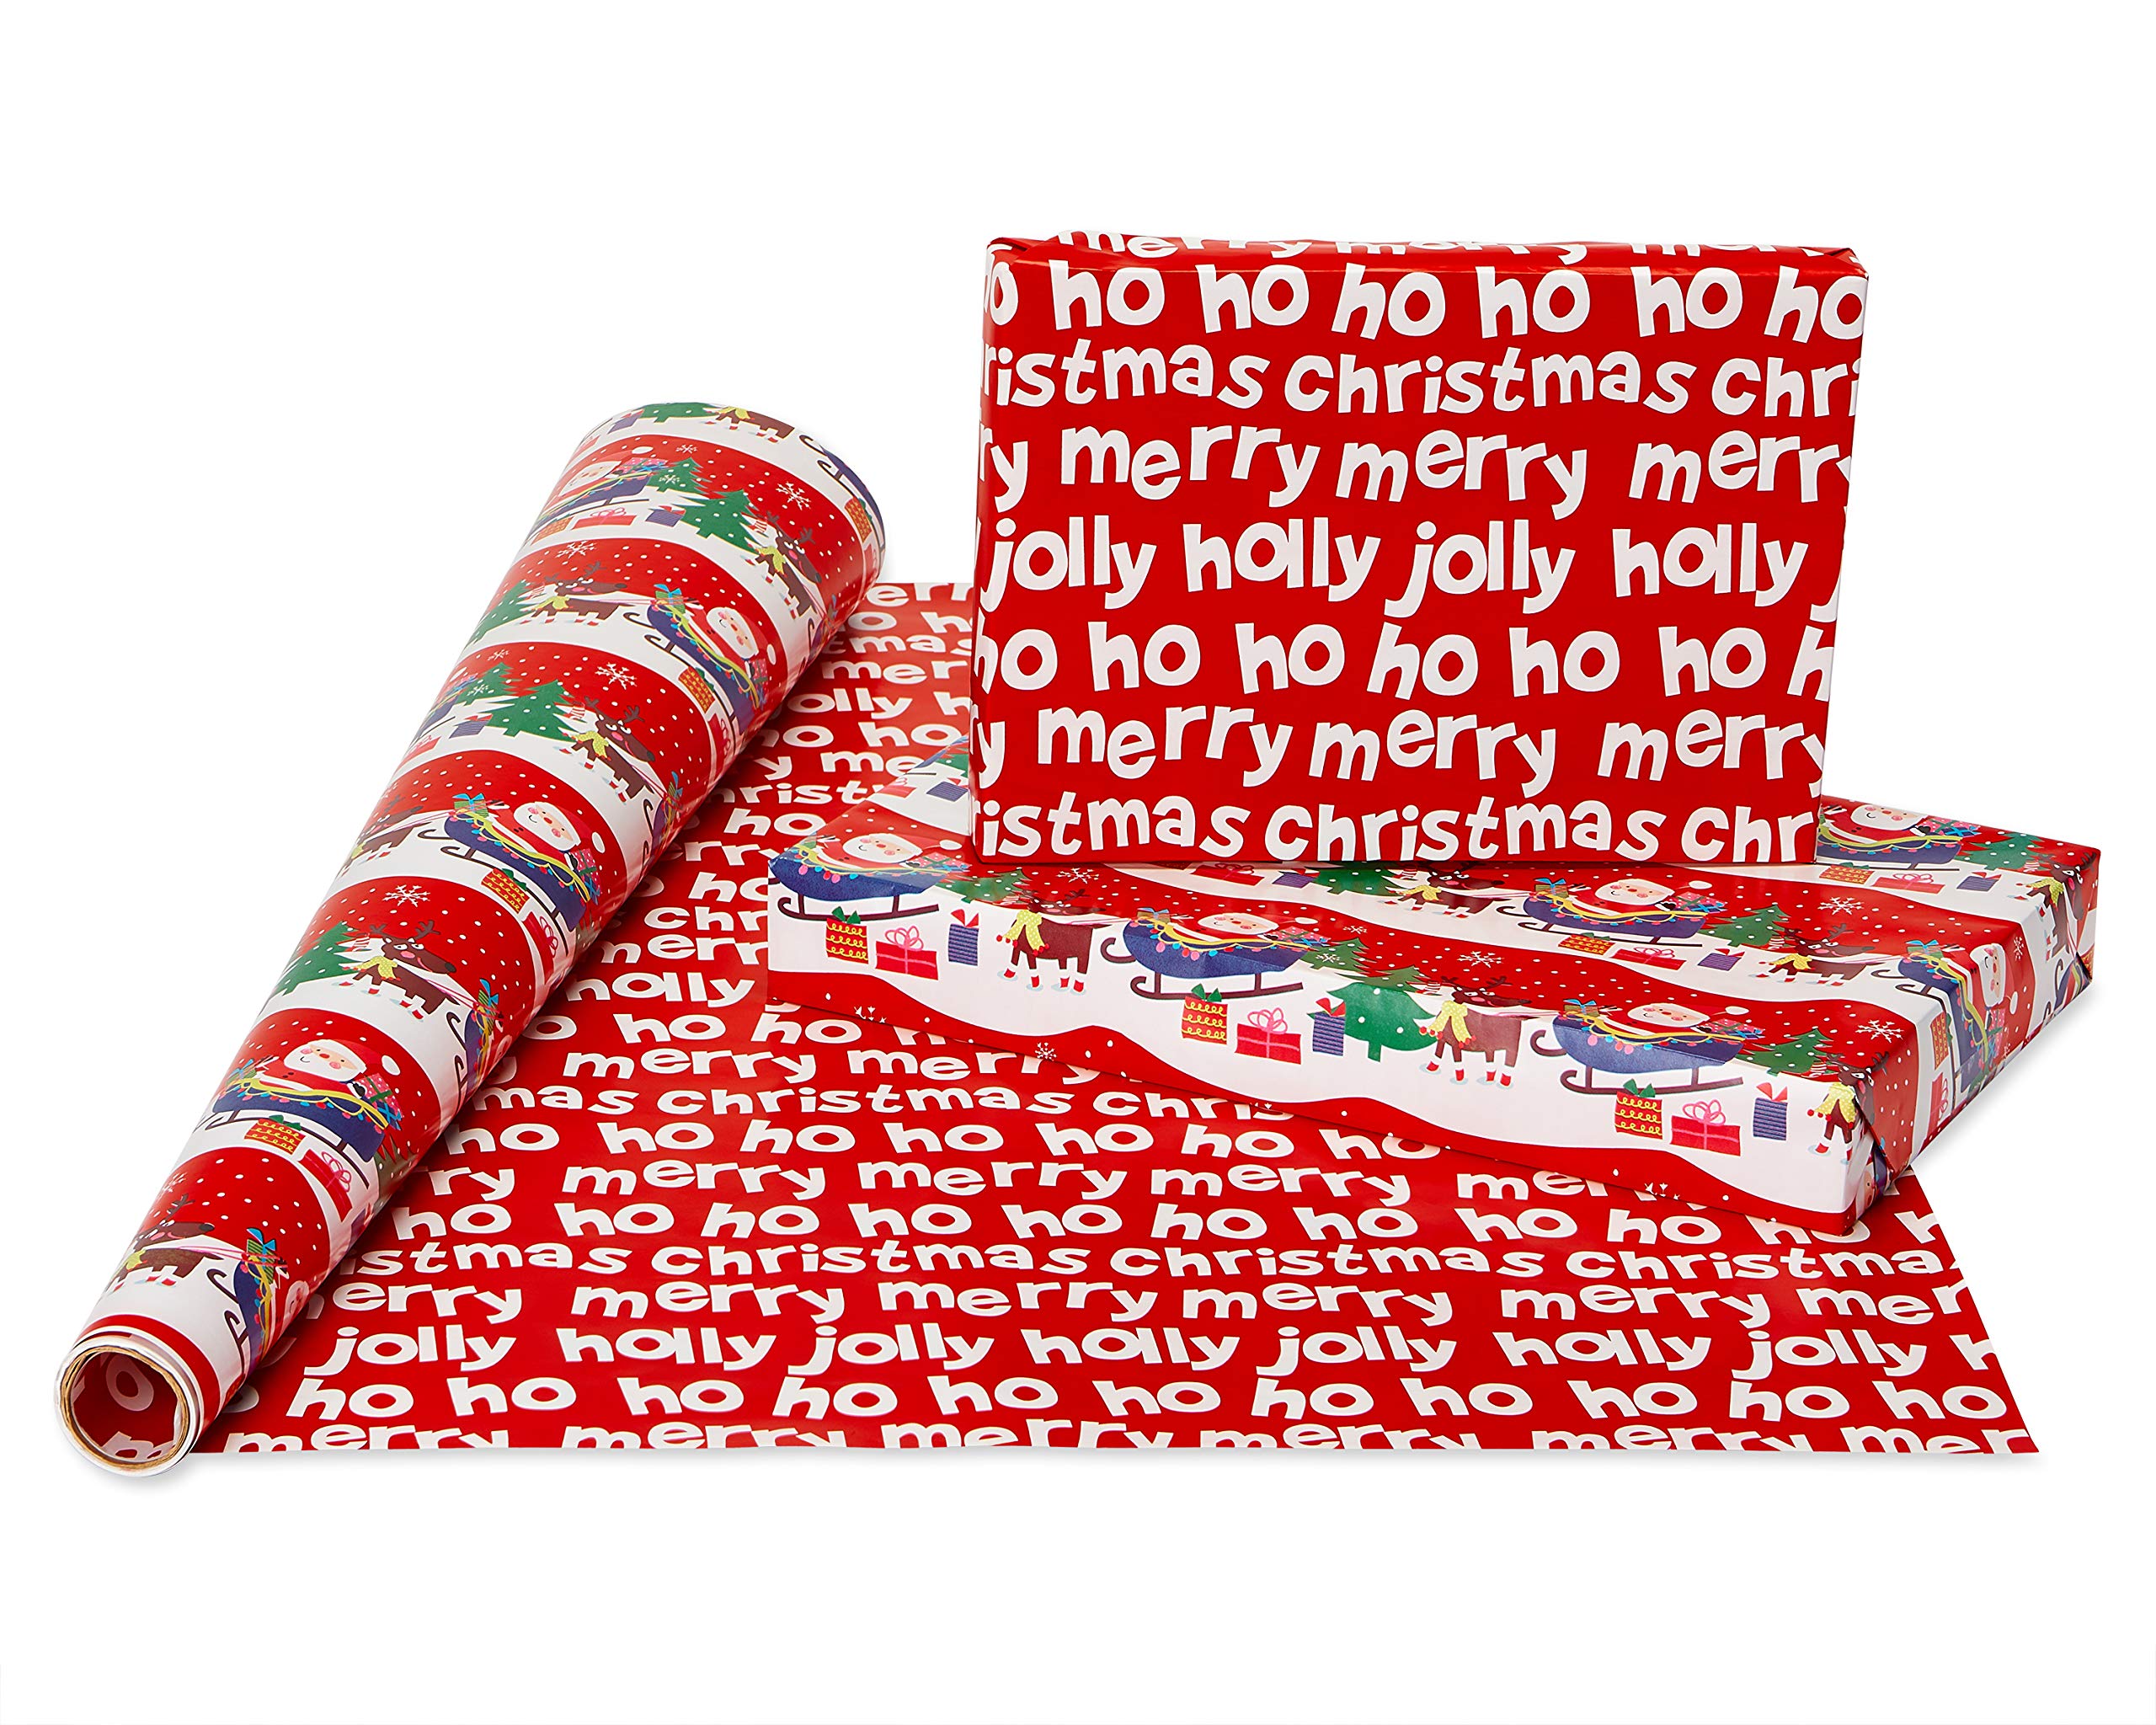 American Greetings 160 sq. ft. Reversible Kids Christmas Wrapping Paper Bundle, Santa, Snowflakes and Snowmen (4 Rolls 30 in. x 16 ft.)